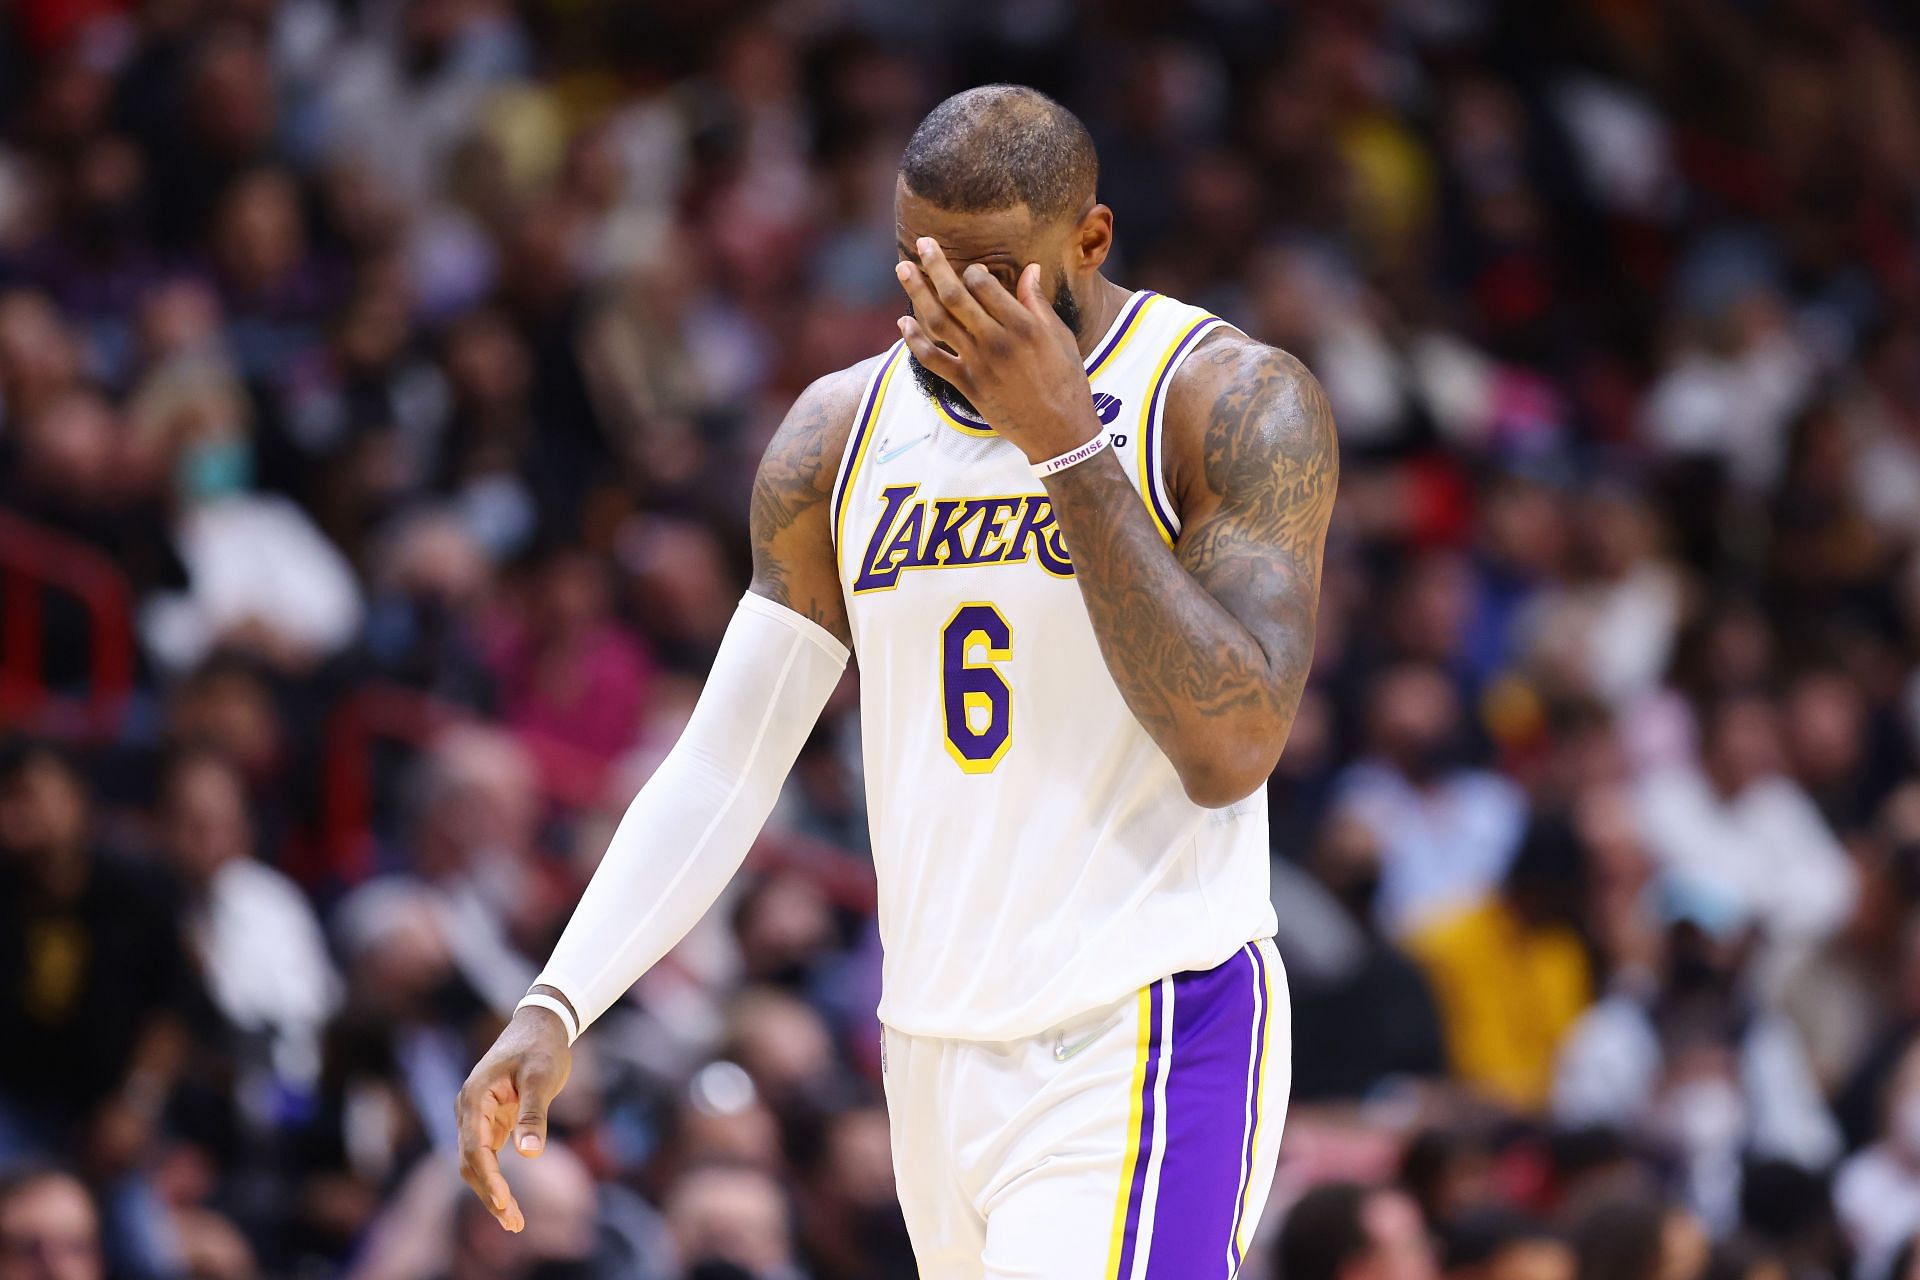 LeBron James of the LA Lakers reacts against the Miami Heat on Jan. 23 in Miami, Florida.